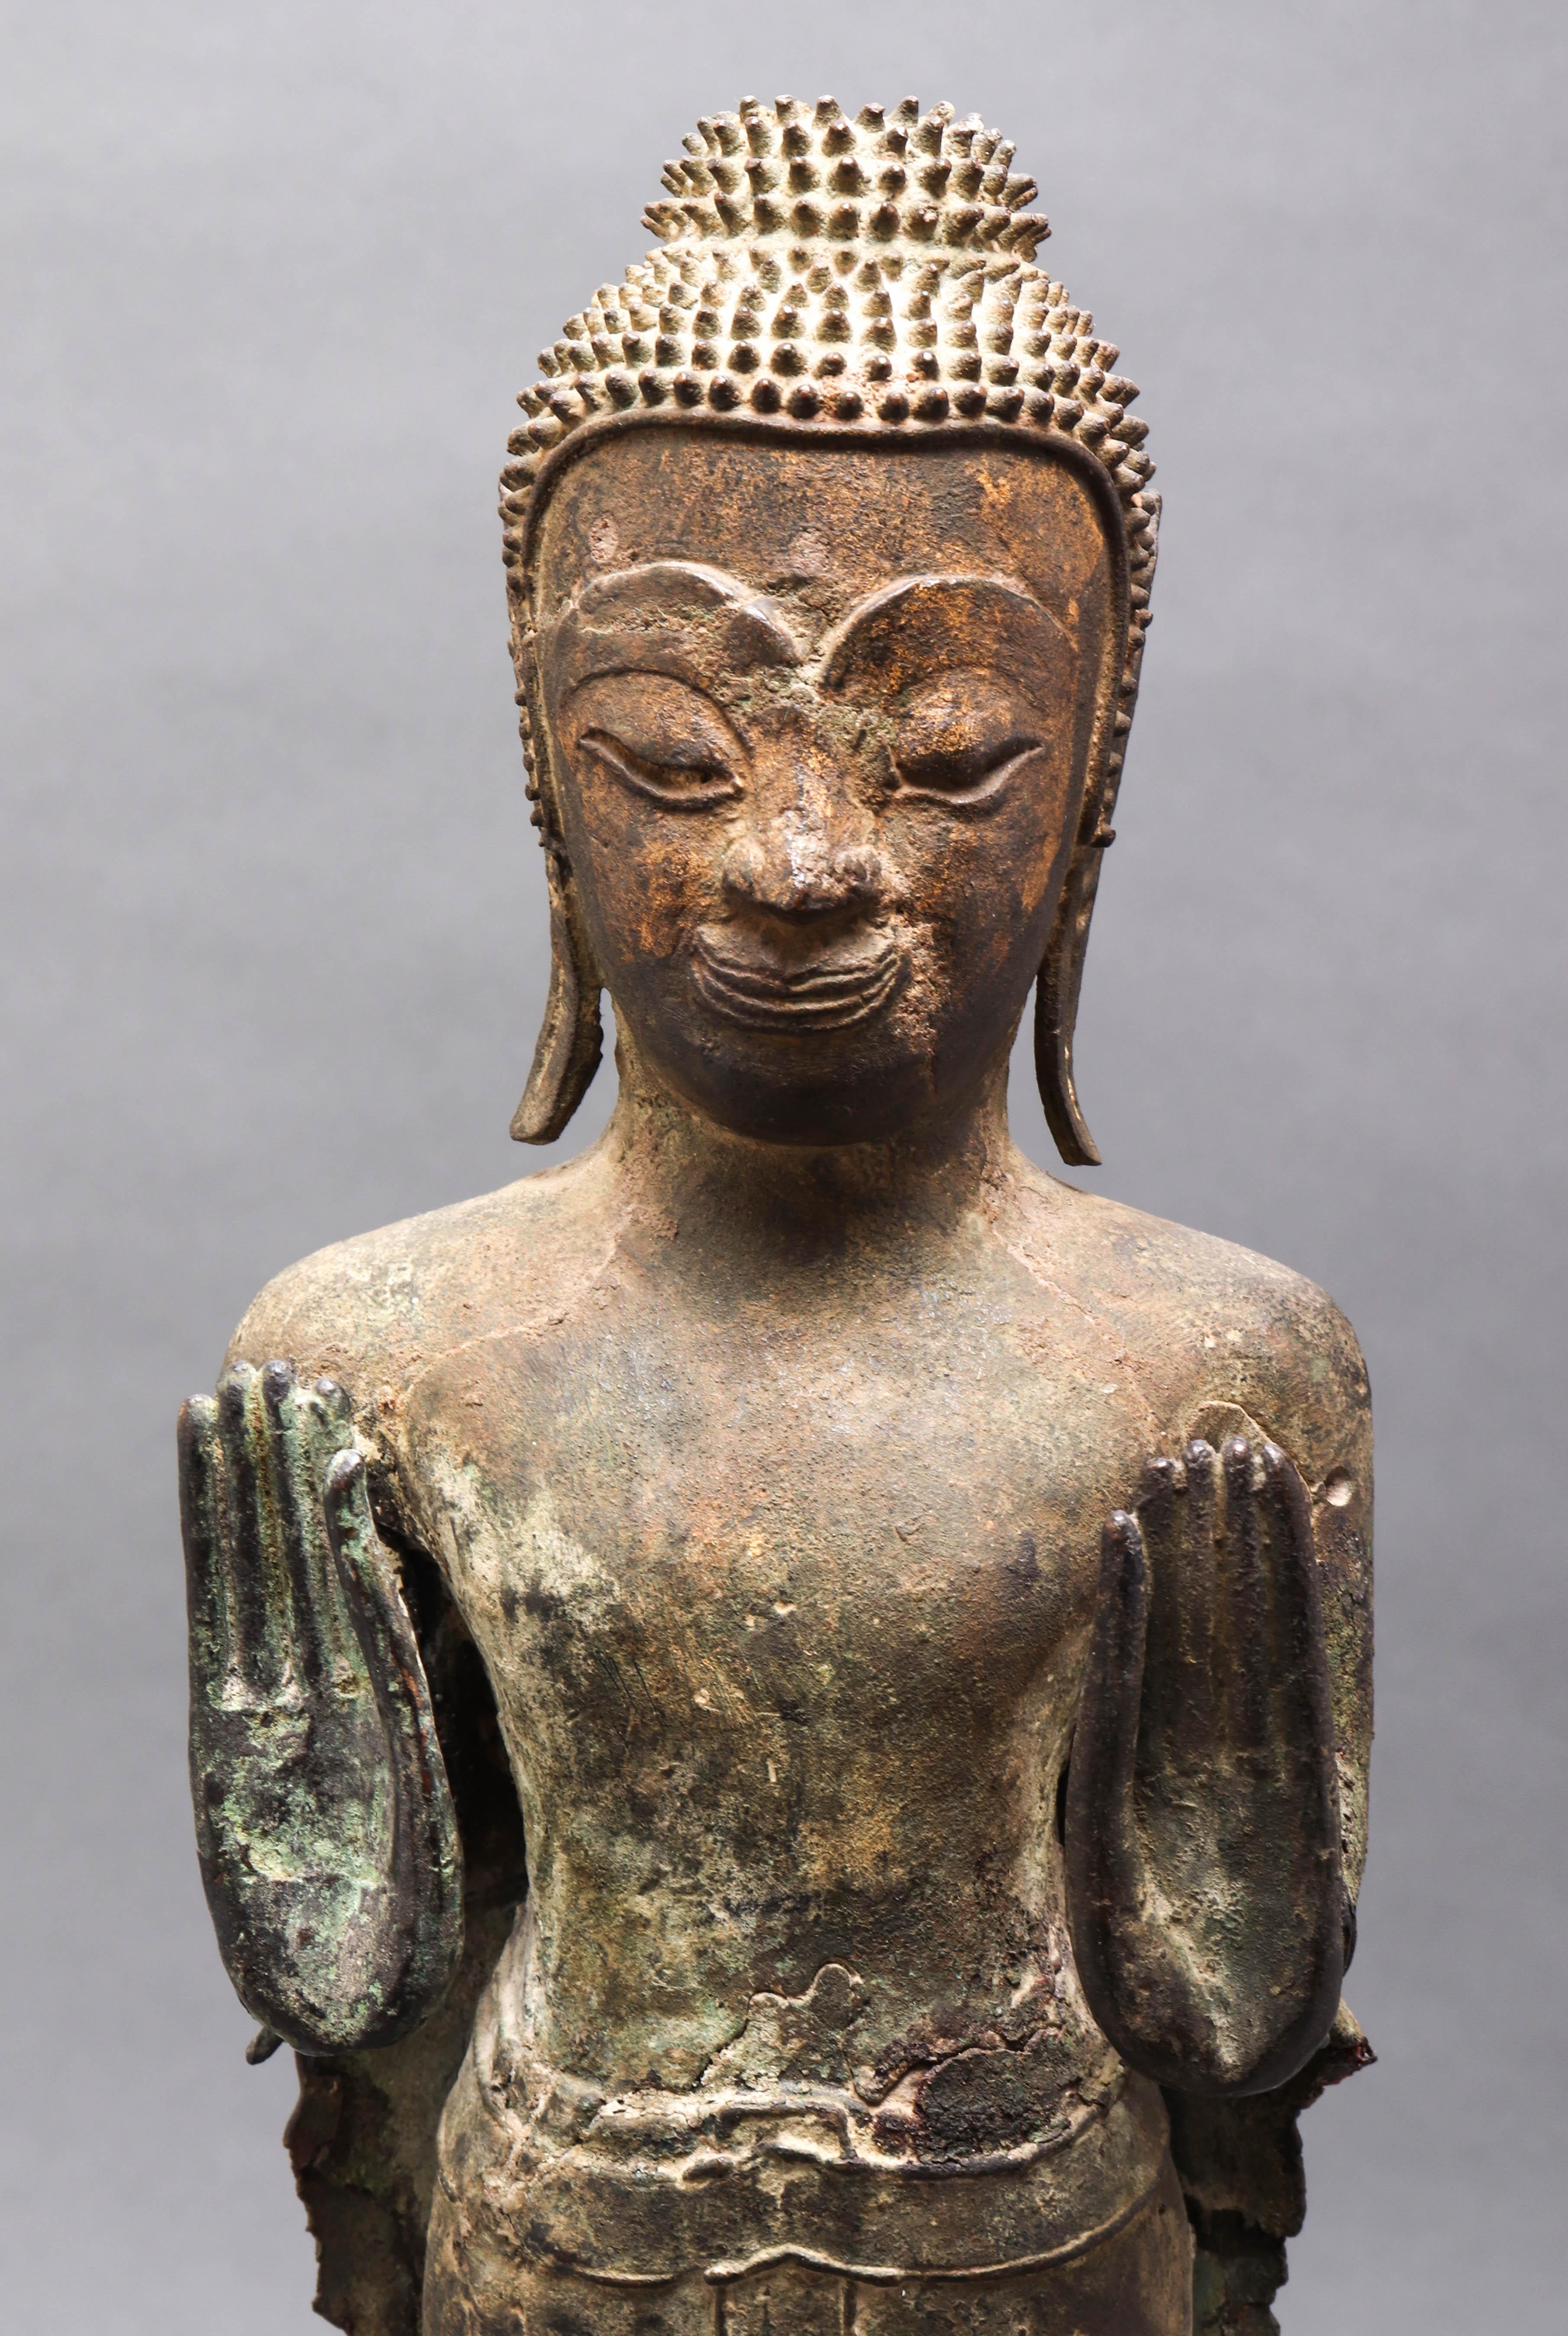 Thai bronze figure of a standing Gautama Buddha. The piece dates from the circa 18th-19th century, with both hands held up in the double abhaya mudra position and standing with feet together. Mounted o a wood plinth base. In great antique condition